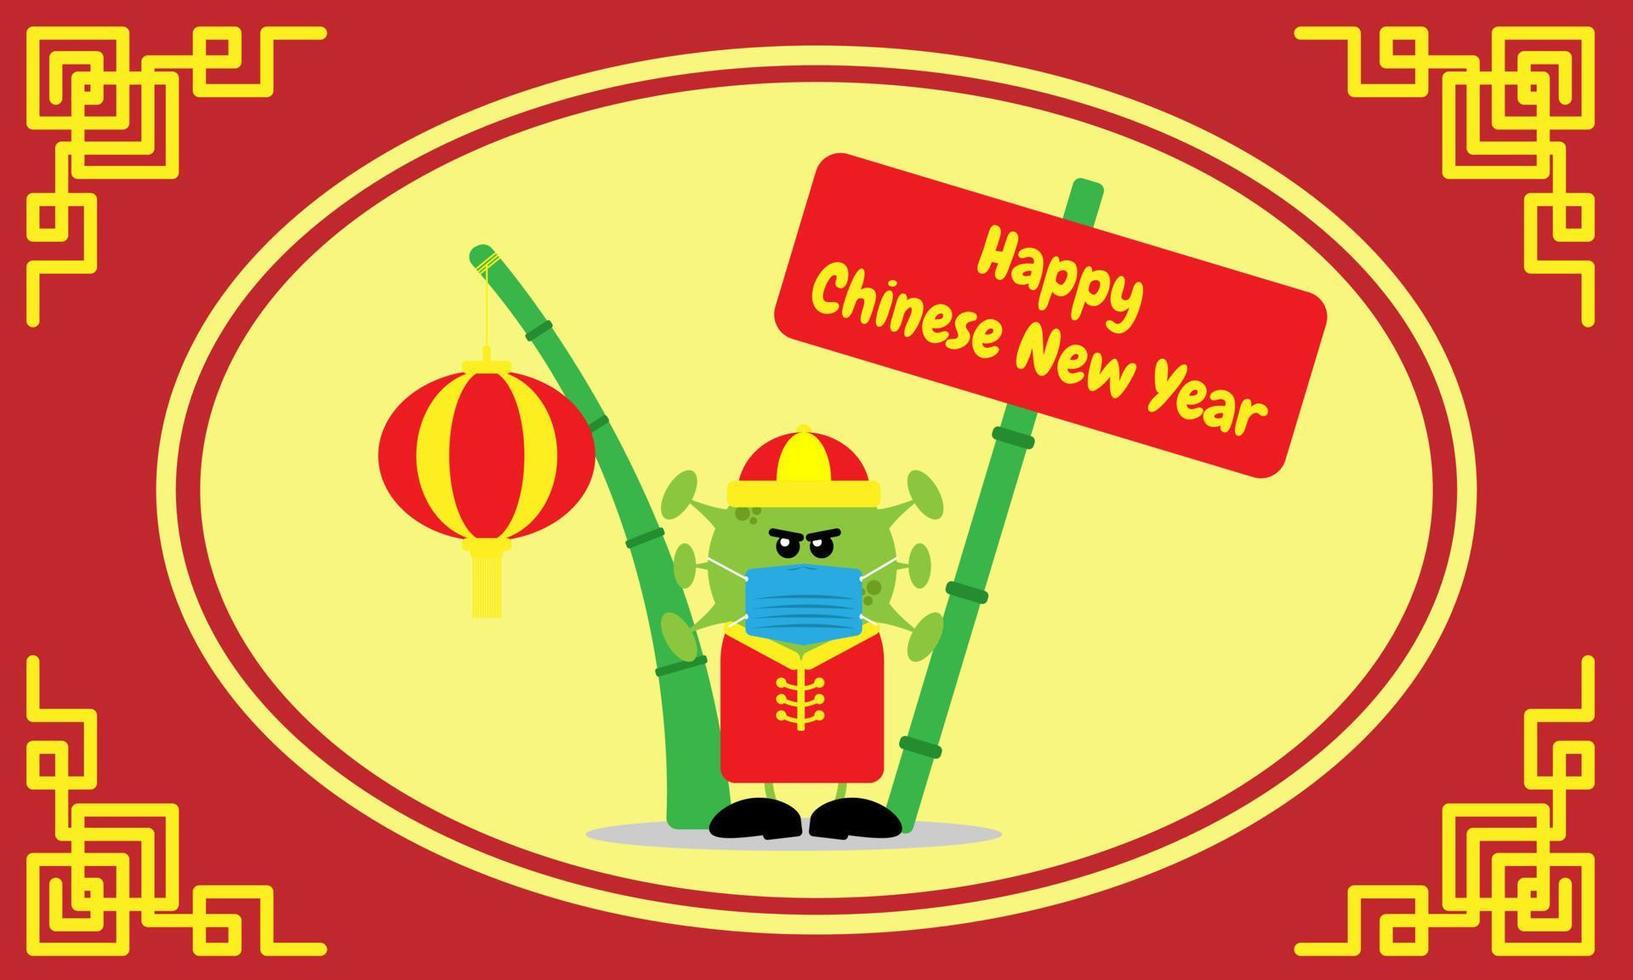 Masked omicron virus wishes you a happy chinese new year. Suitable for greeting card, banner, cover, etc vector